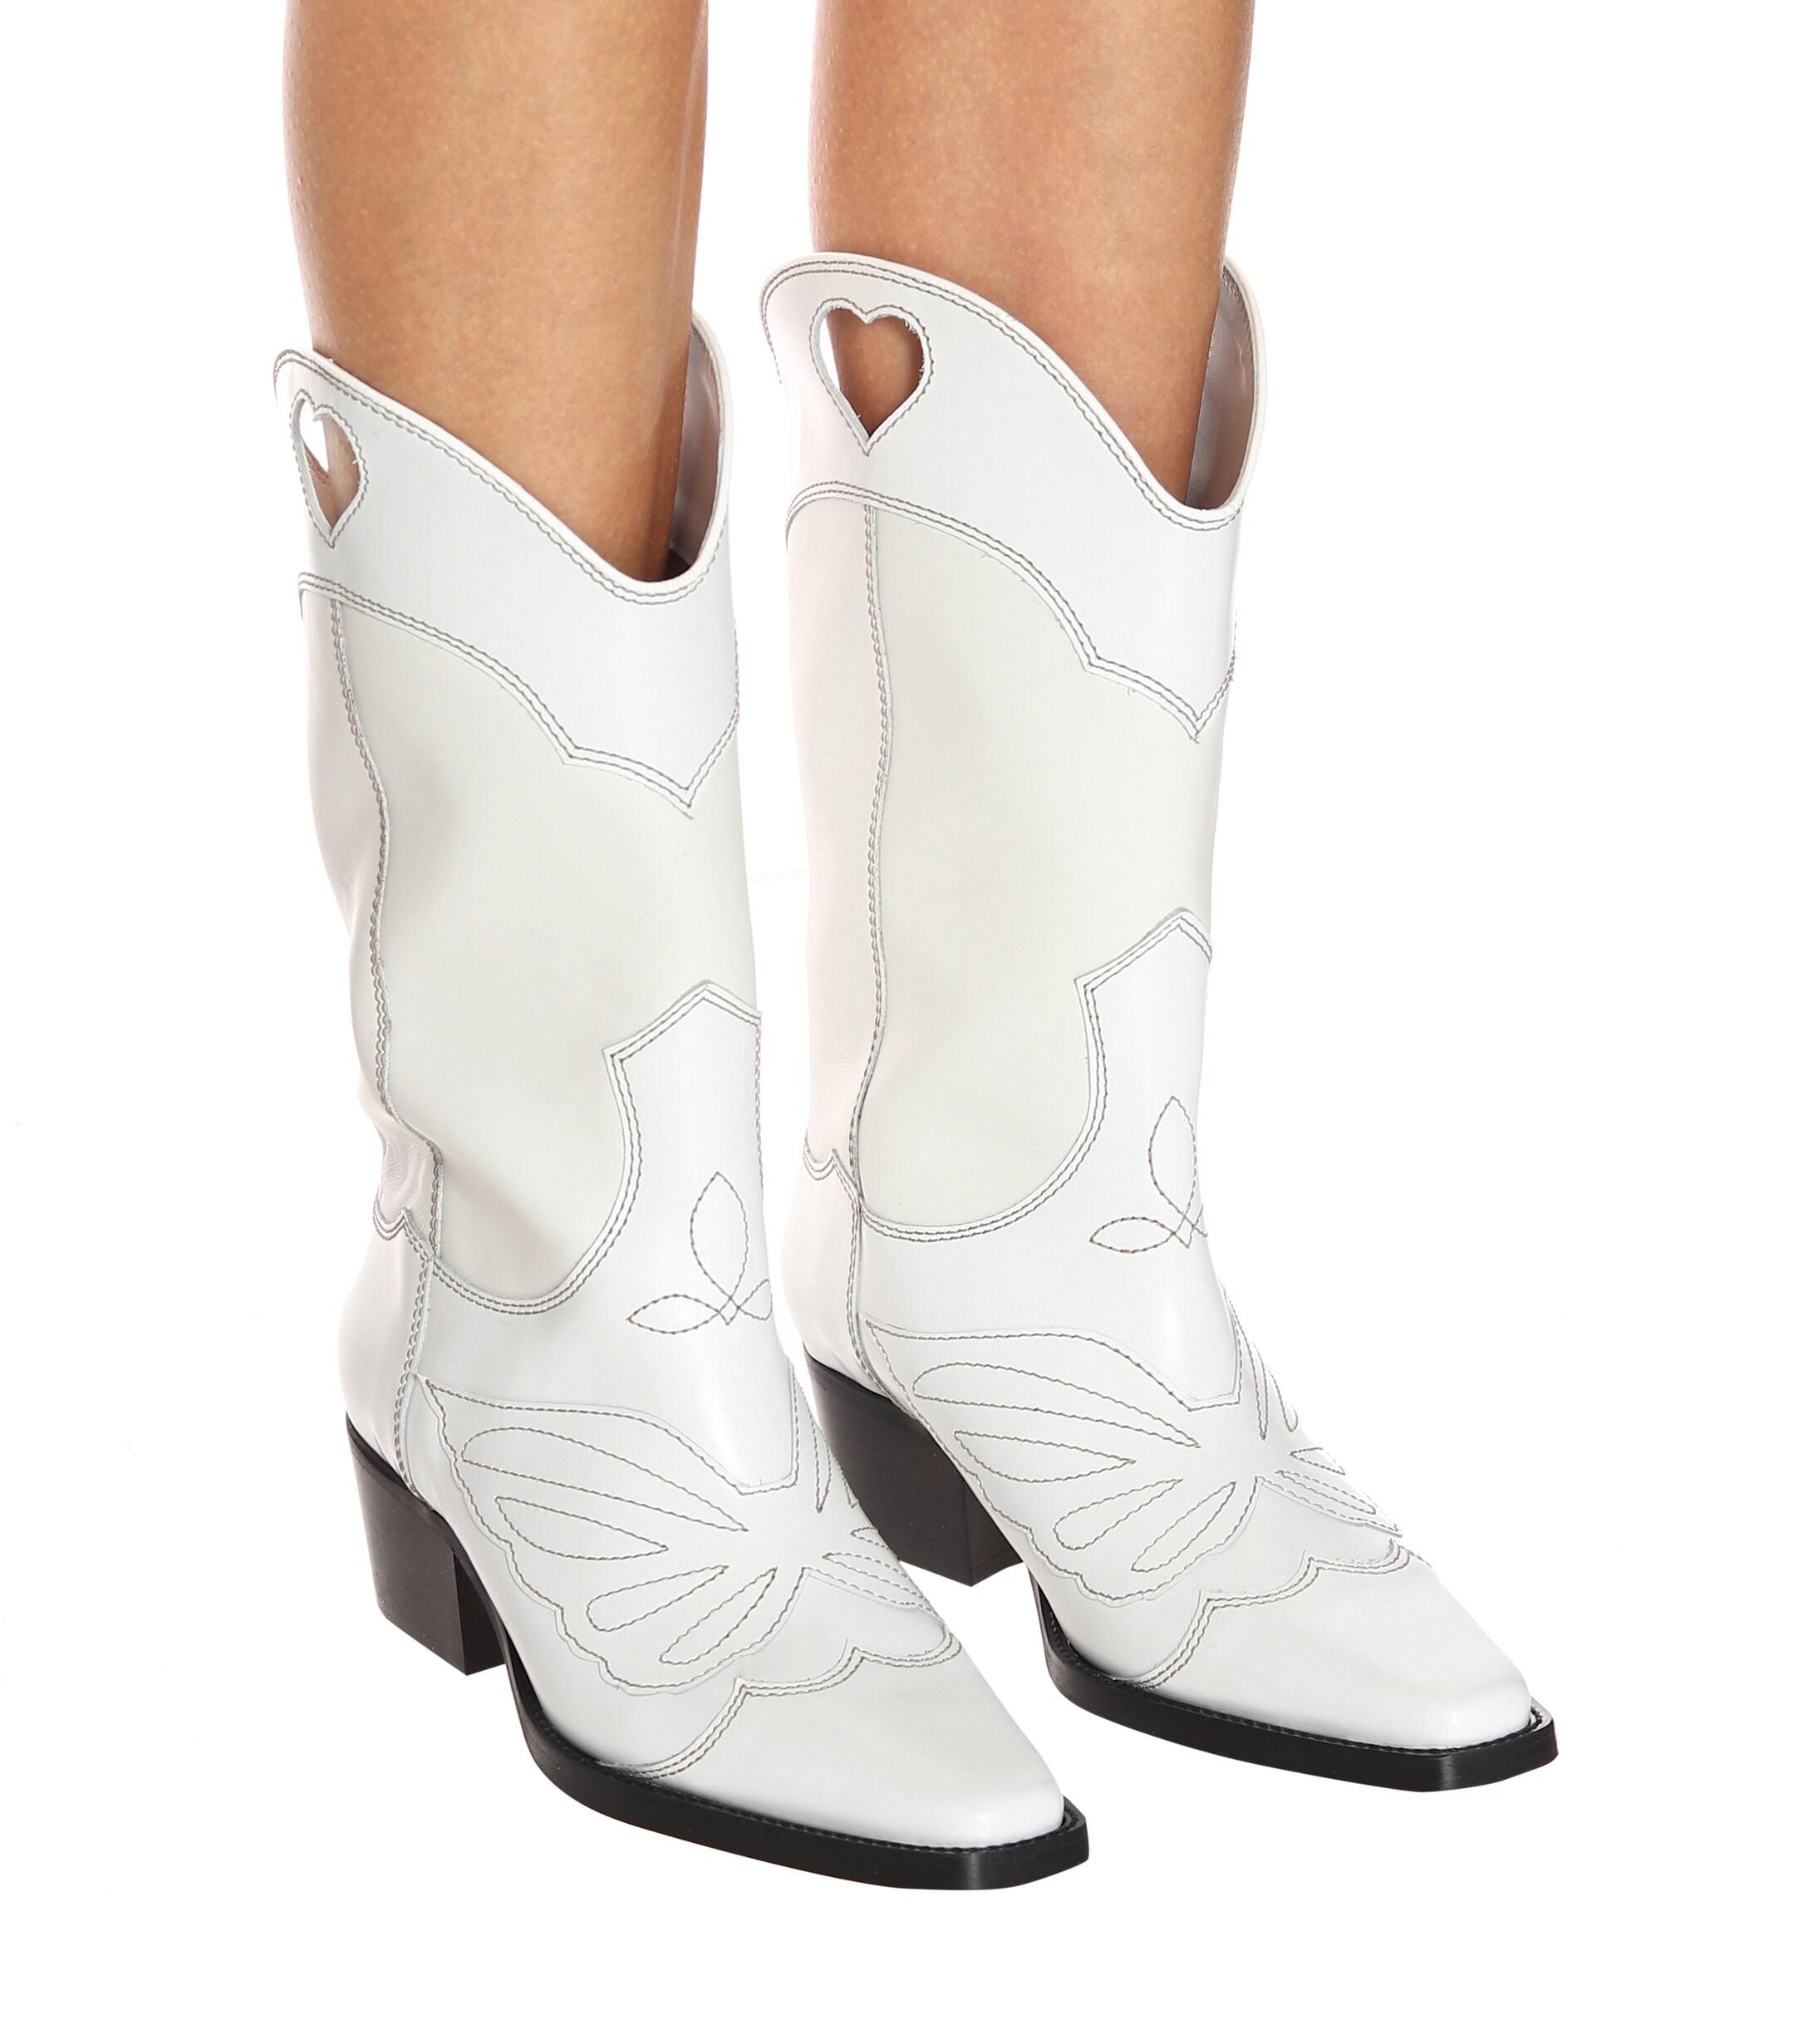 Ganni Exclusive To Mytheresa – Leather Cowboy Boots in White - Lyst